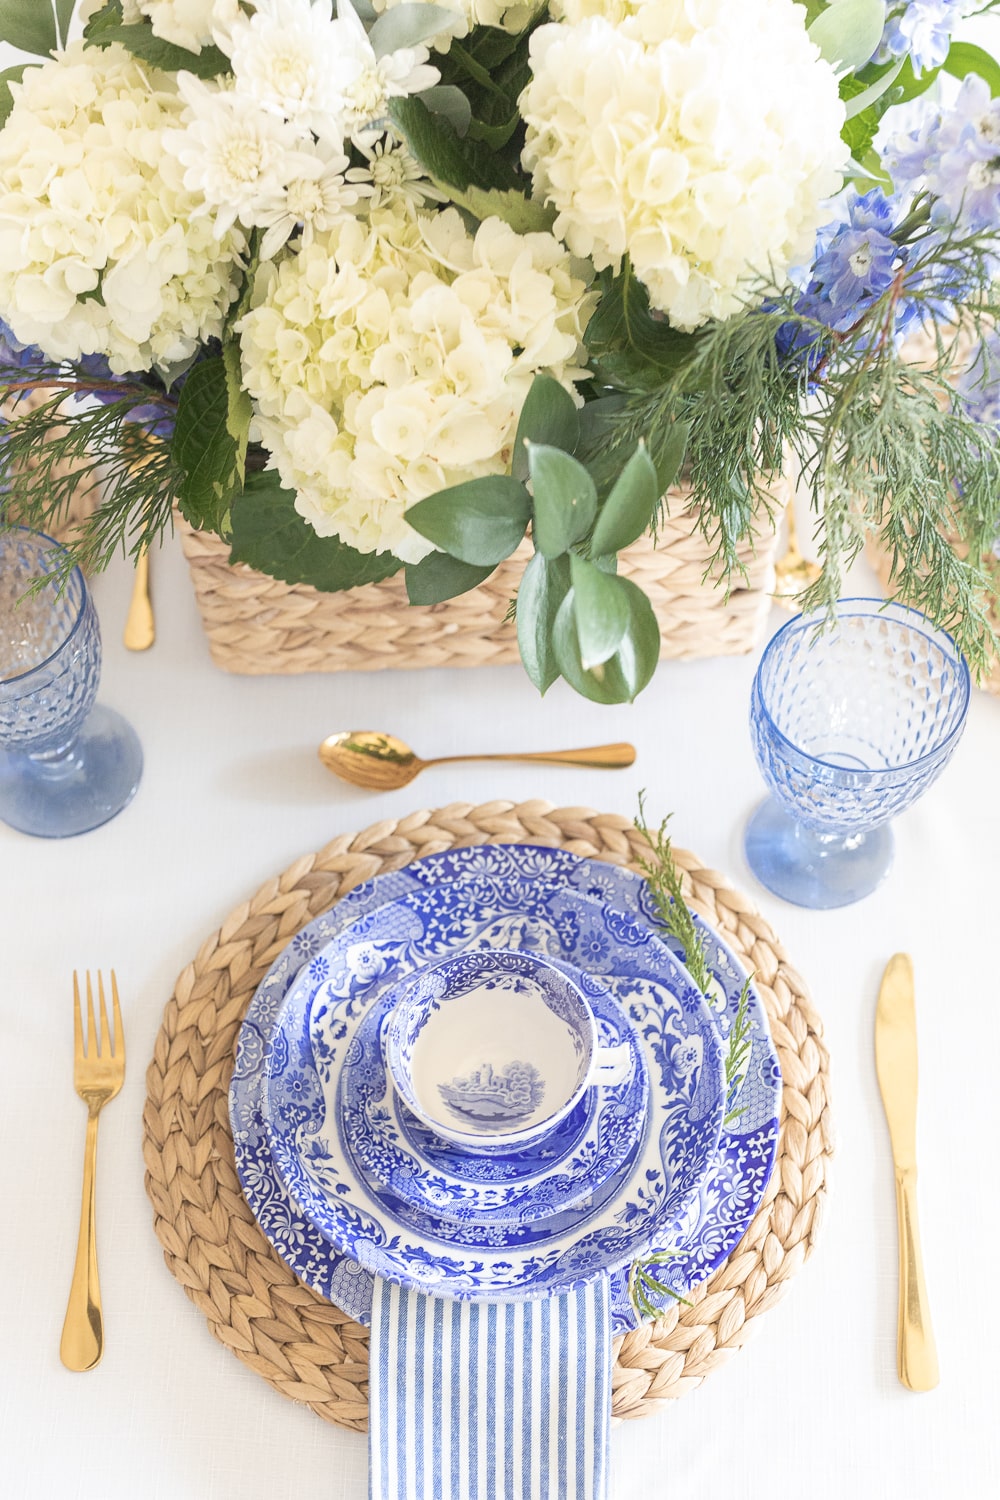 Spode blue Italian teacups, Spode blue Italian pasta bowls, and Spode blue Italian dinner plates styled in a coastal winter table setting on Diary of a Debutante